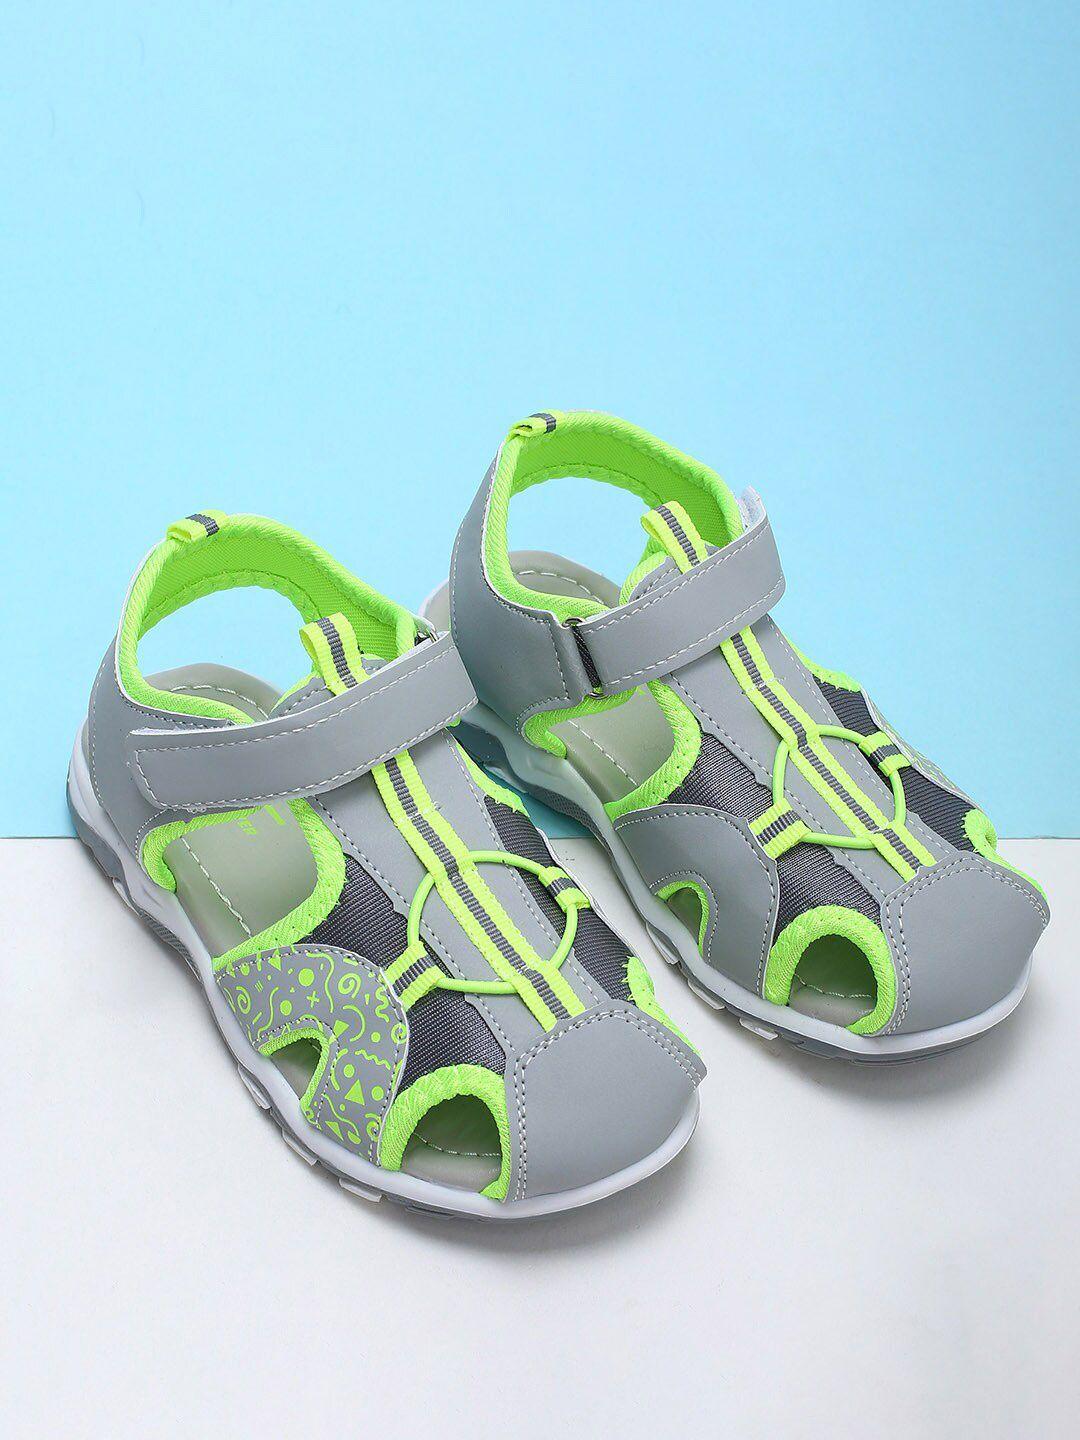 fame-forever-by-lifestyle-boys-grey-&-green-fisherman-sandals